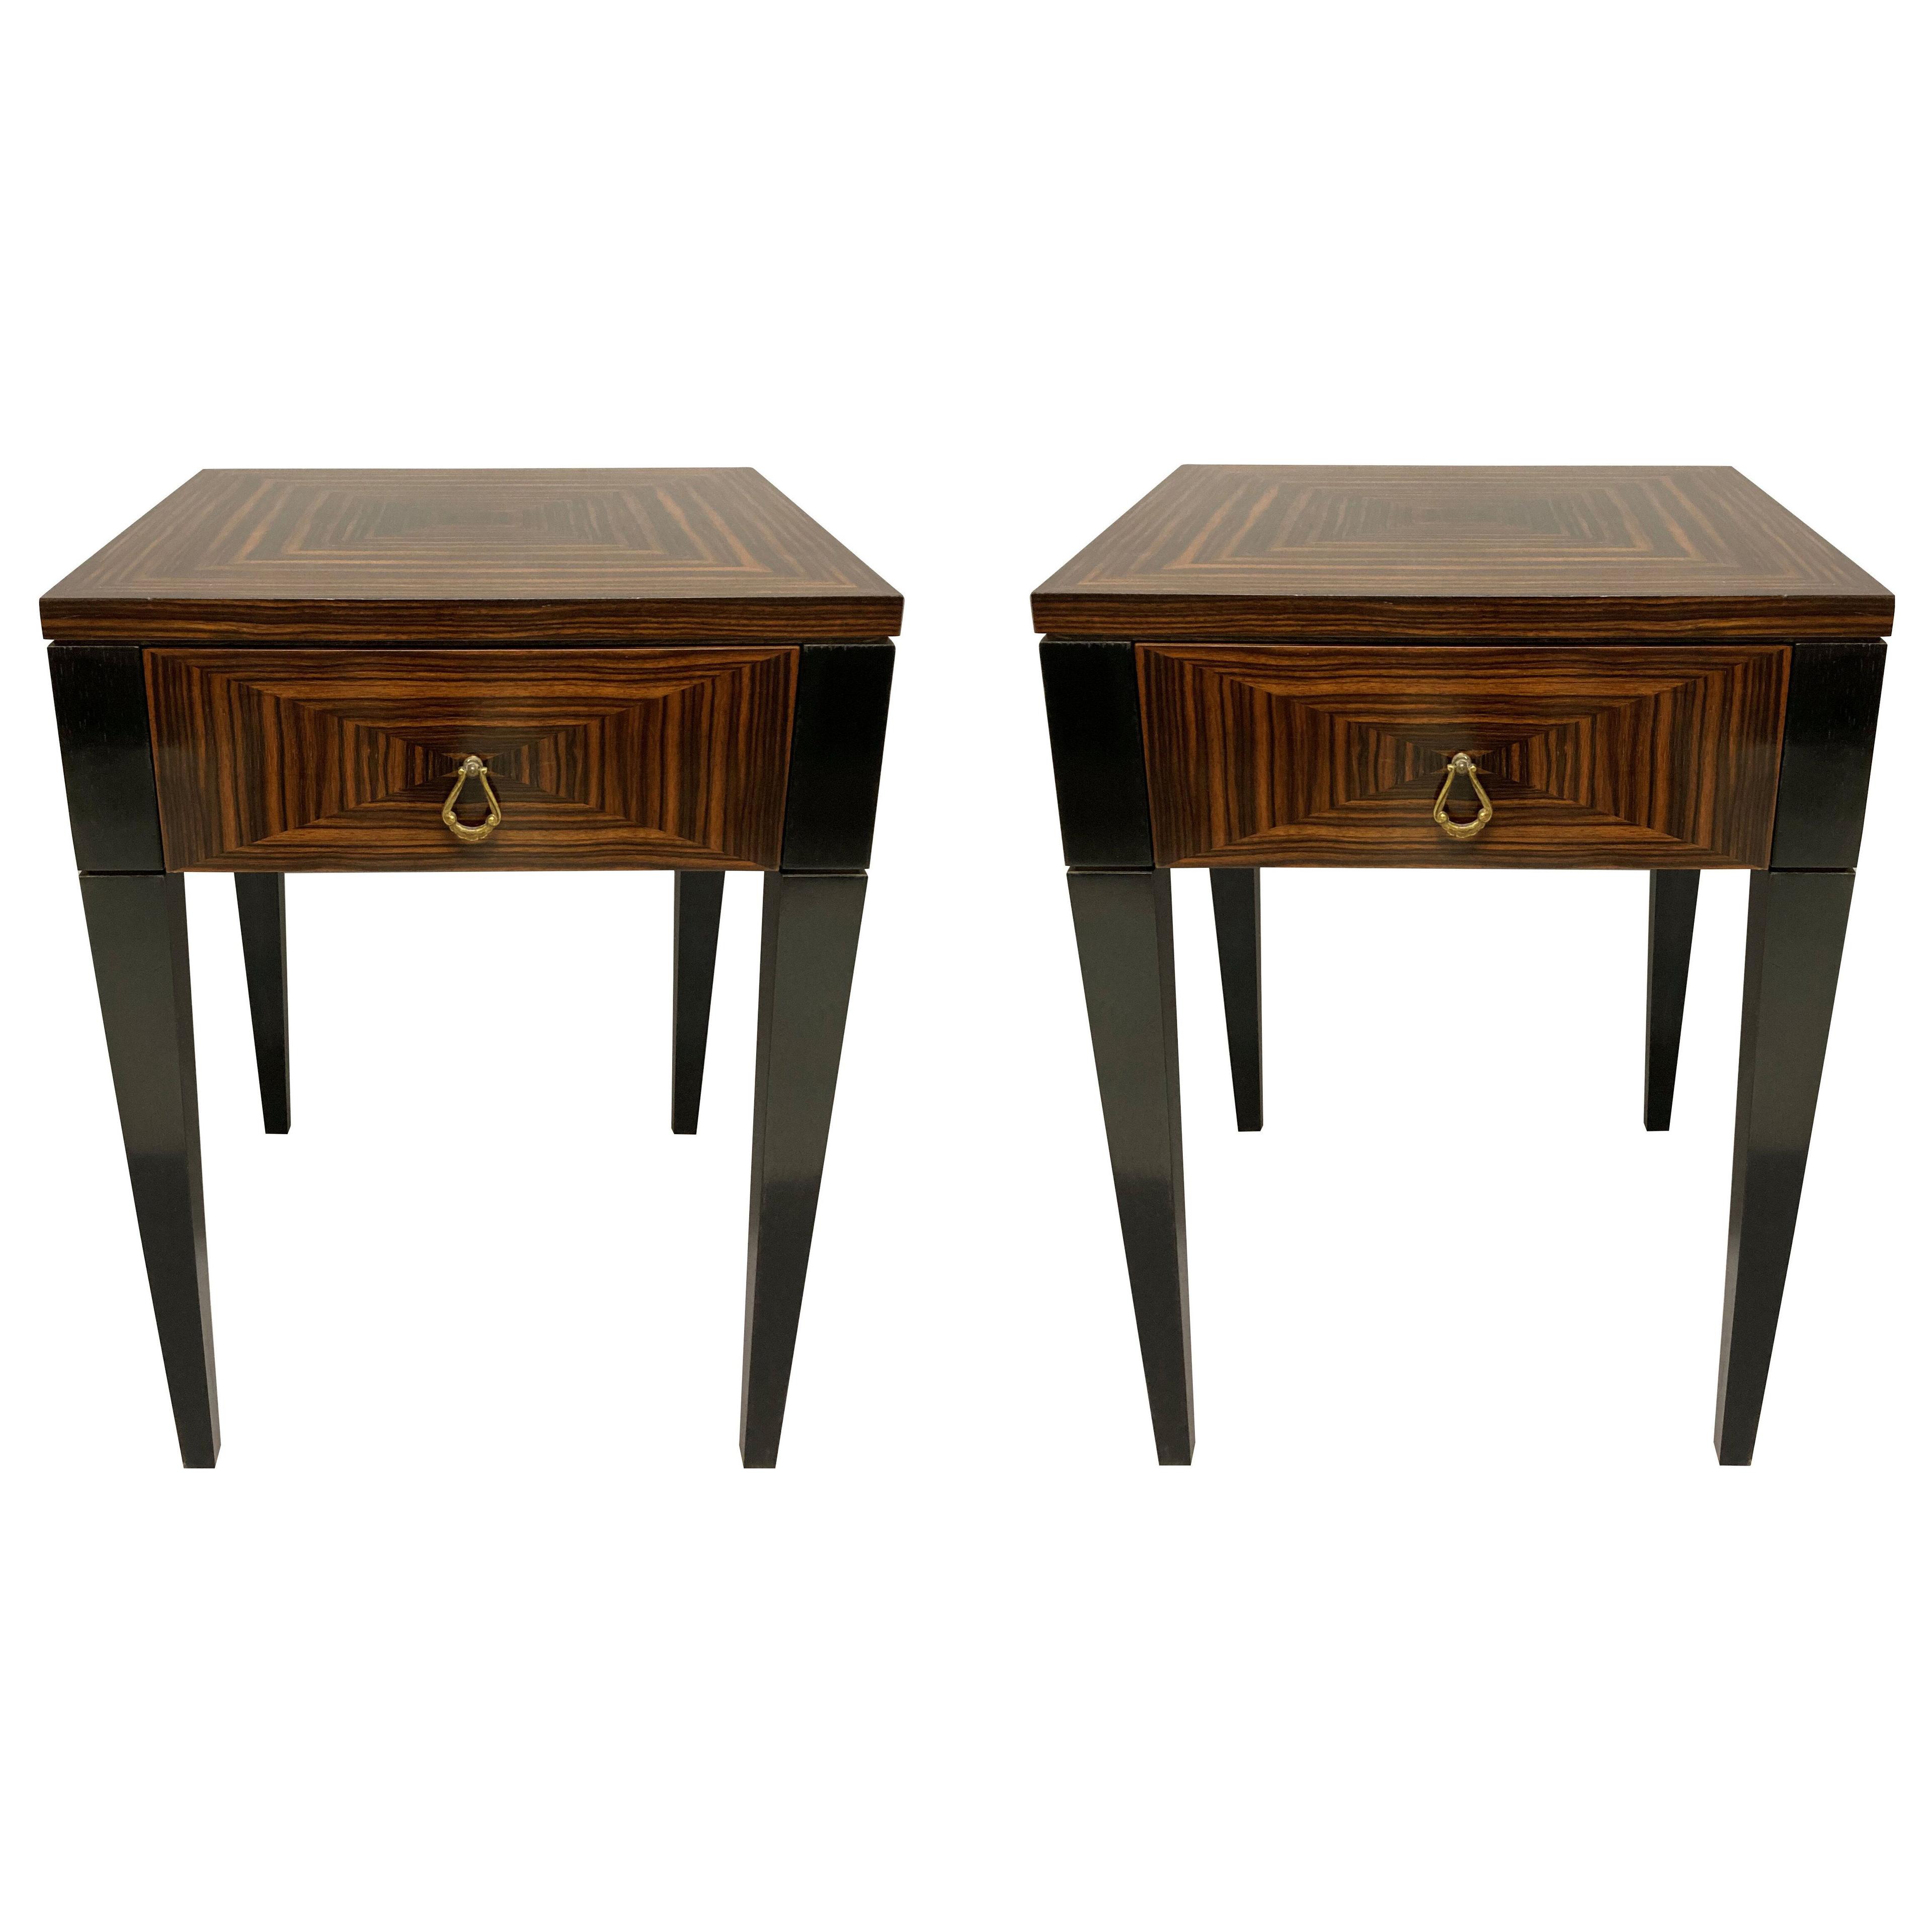 A PAIR OF ITALIAN NIGHT STANDS IN ZEBRA WOOD